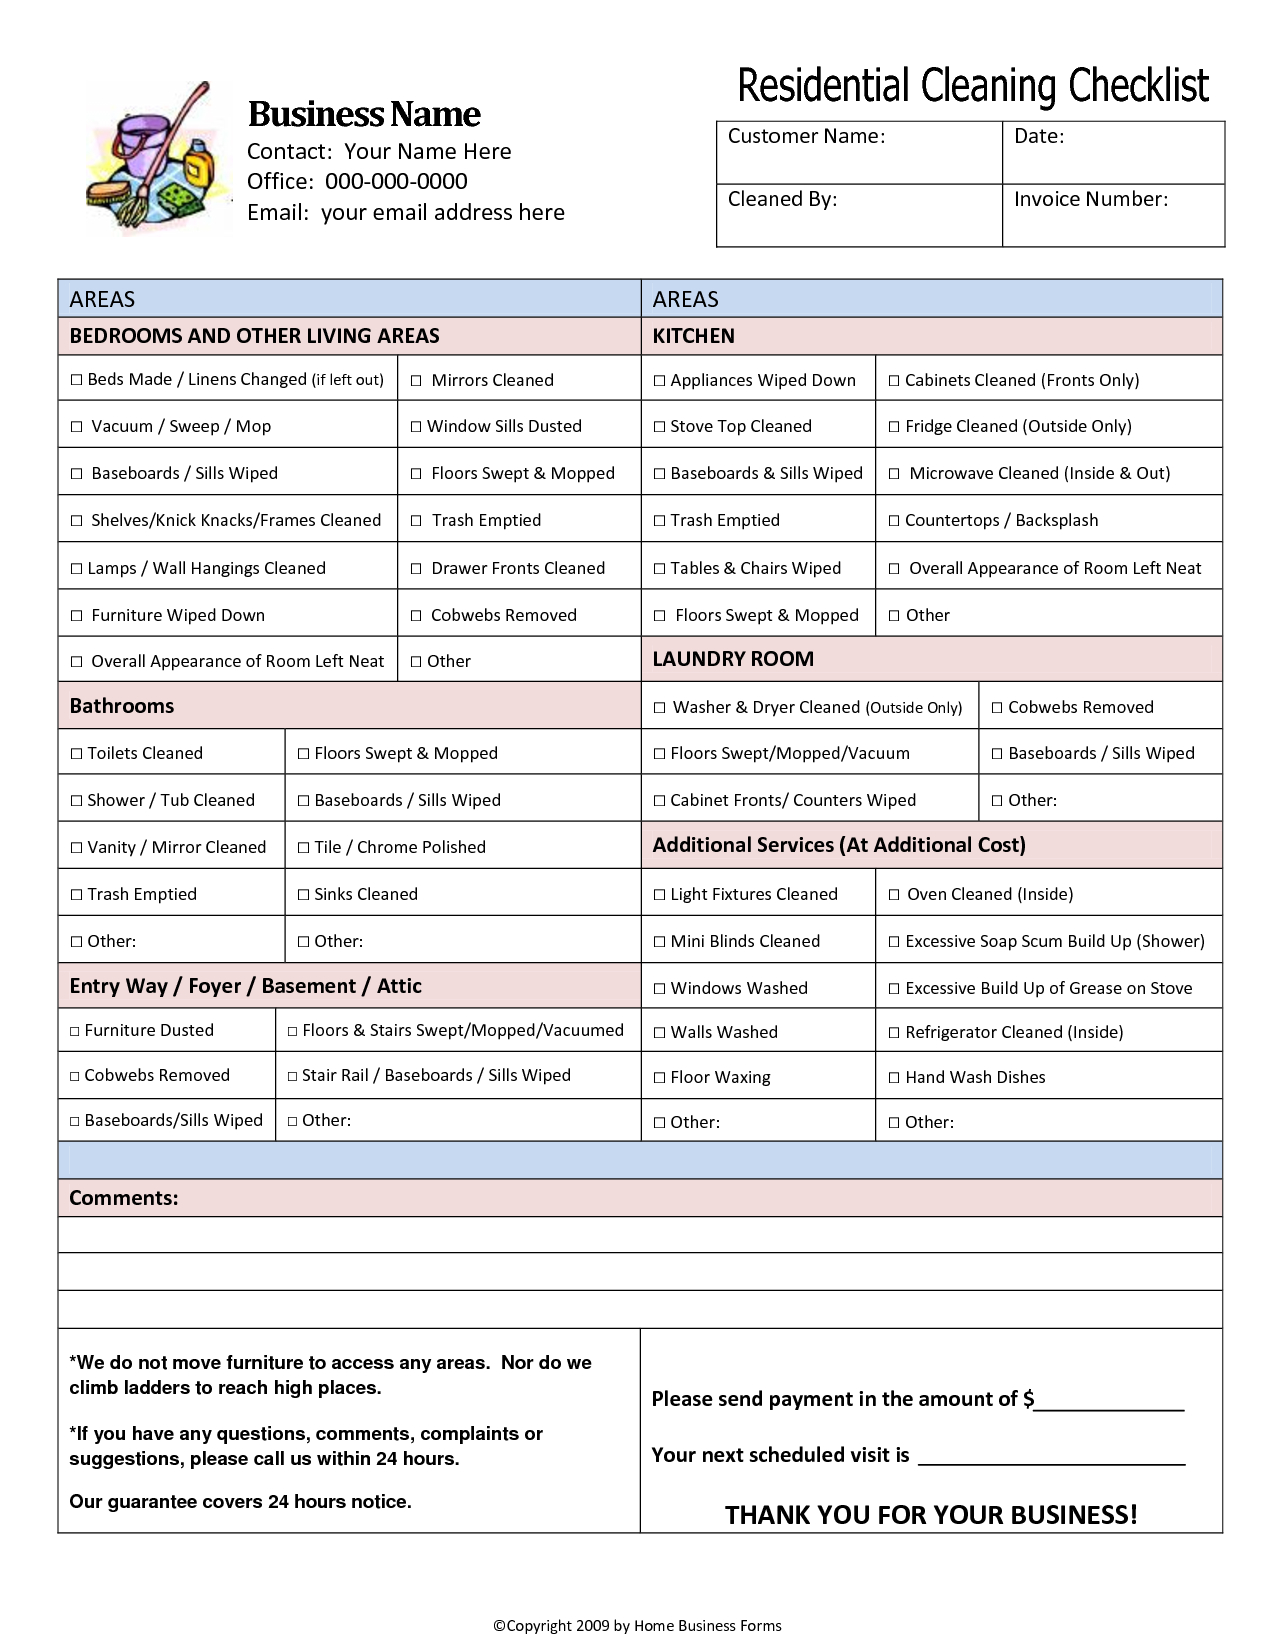 Free Templates For House Cleaning Checklist | House Cleaning - Free Printable House Cleaning Checklist